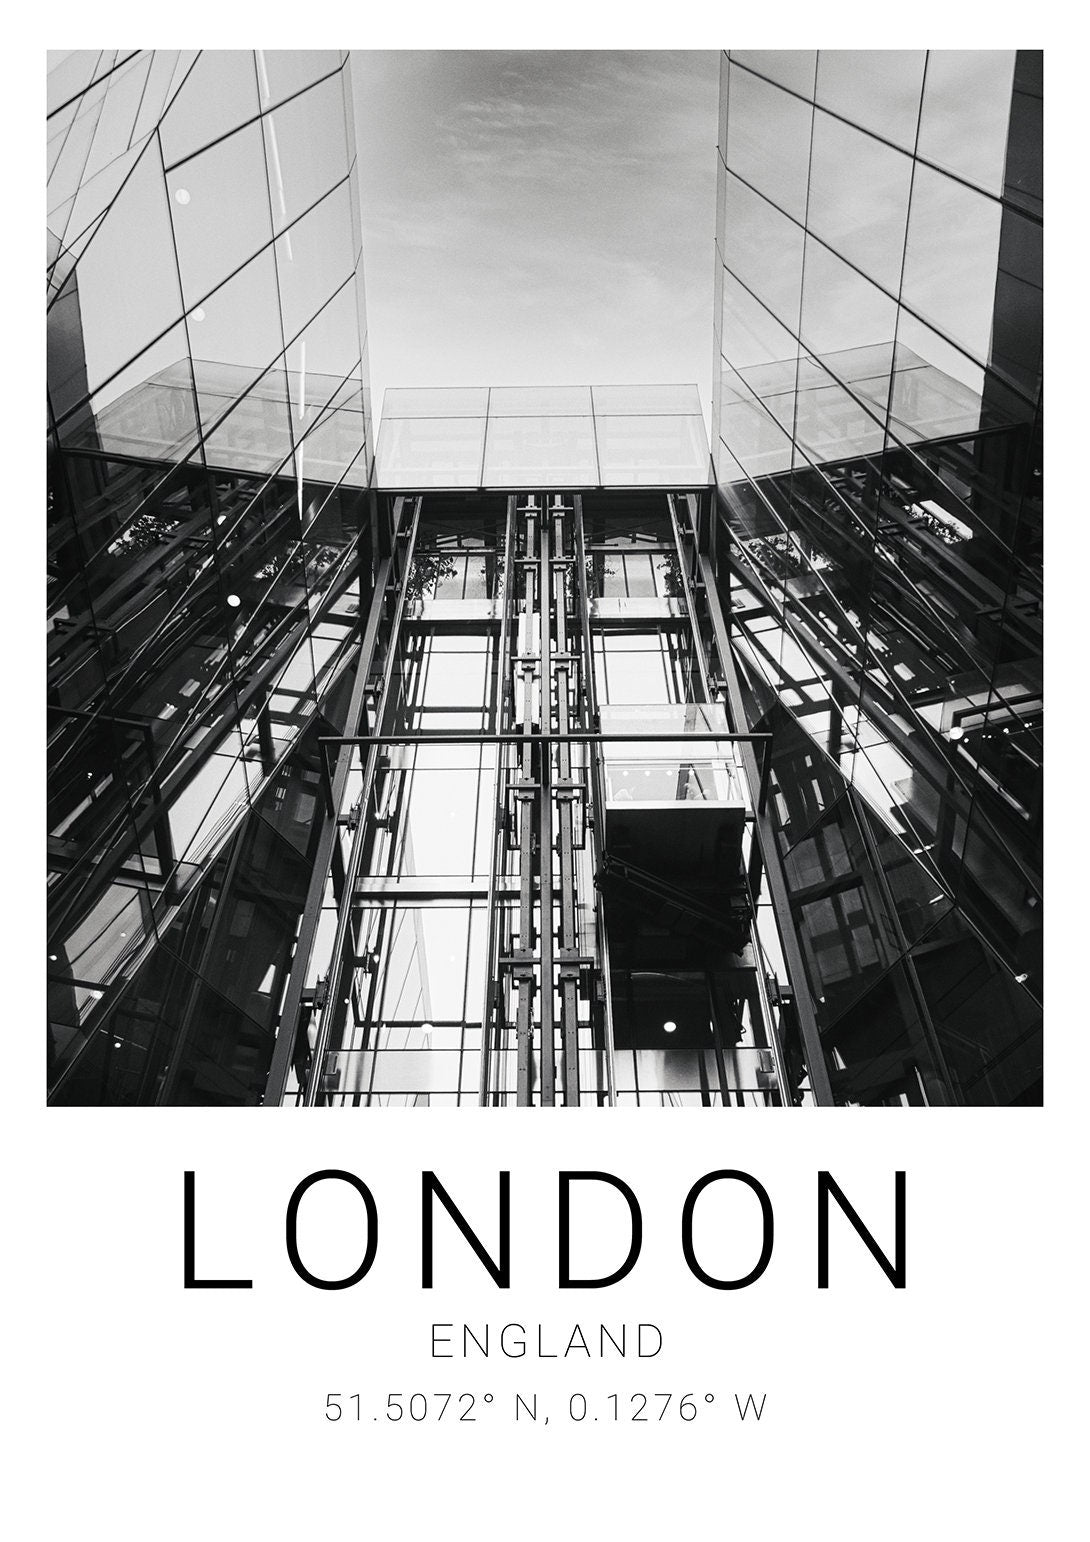 London Premium Travel Prints View of London - Wall hangings home decor Art - Black and white - A4 A3 A2  - Festival Merch